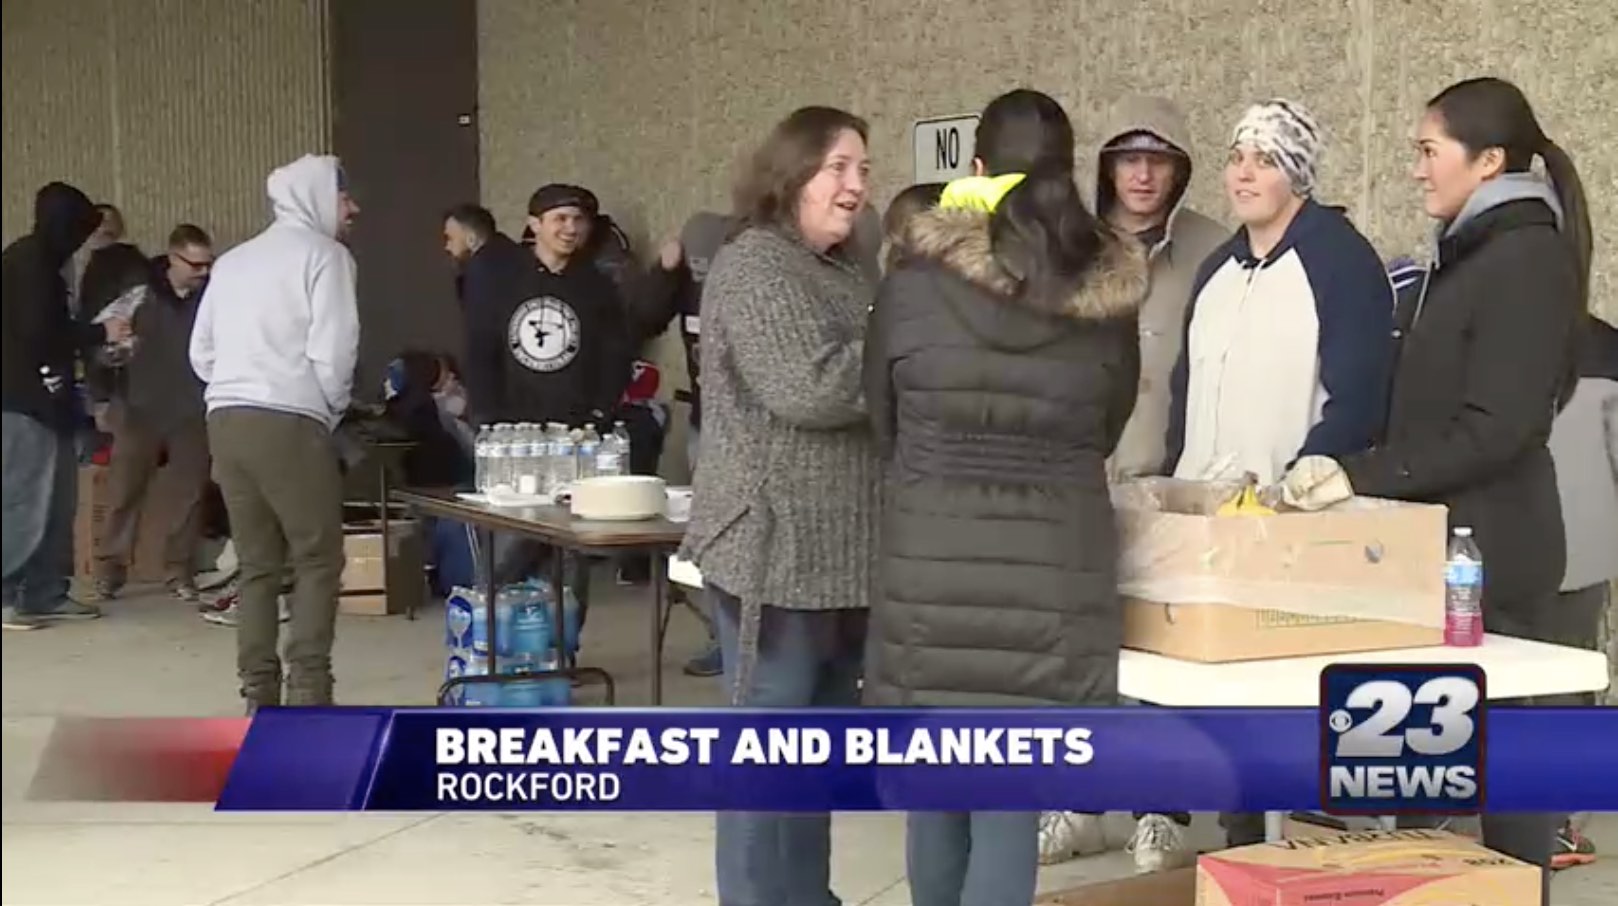 Breakfast and Blankets event serves 115 people